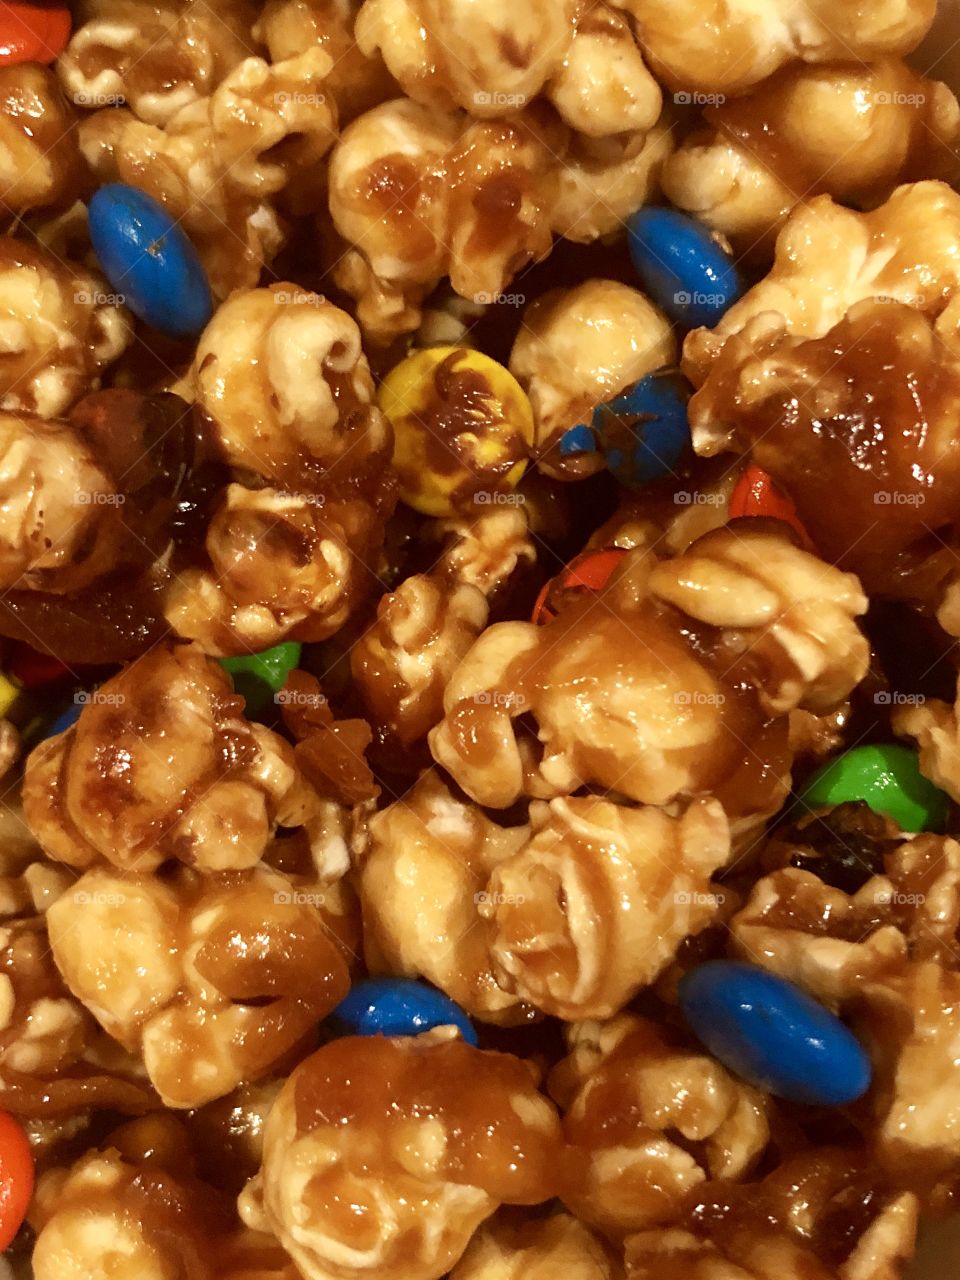 The best snack my hubs has made yet- m&m infused caramel popcorn!